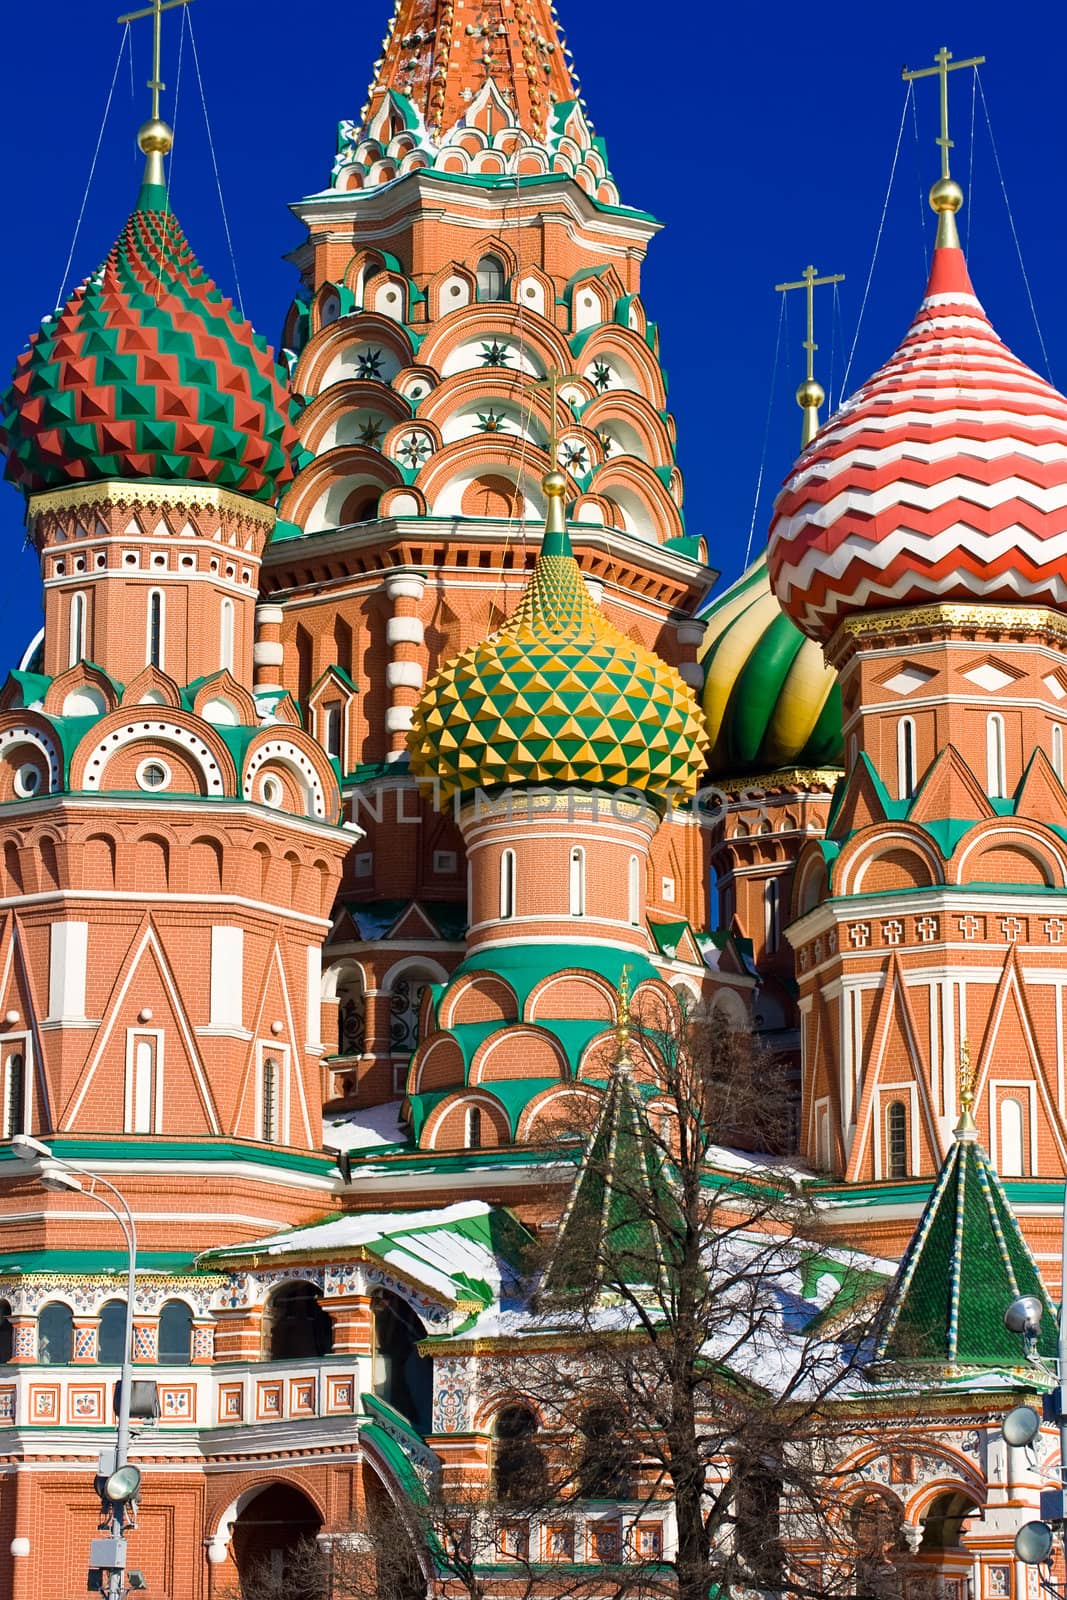 St Basil's Cathedral on Red Square, Moscow, Russia